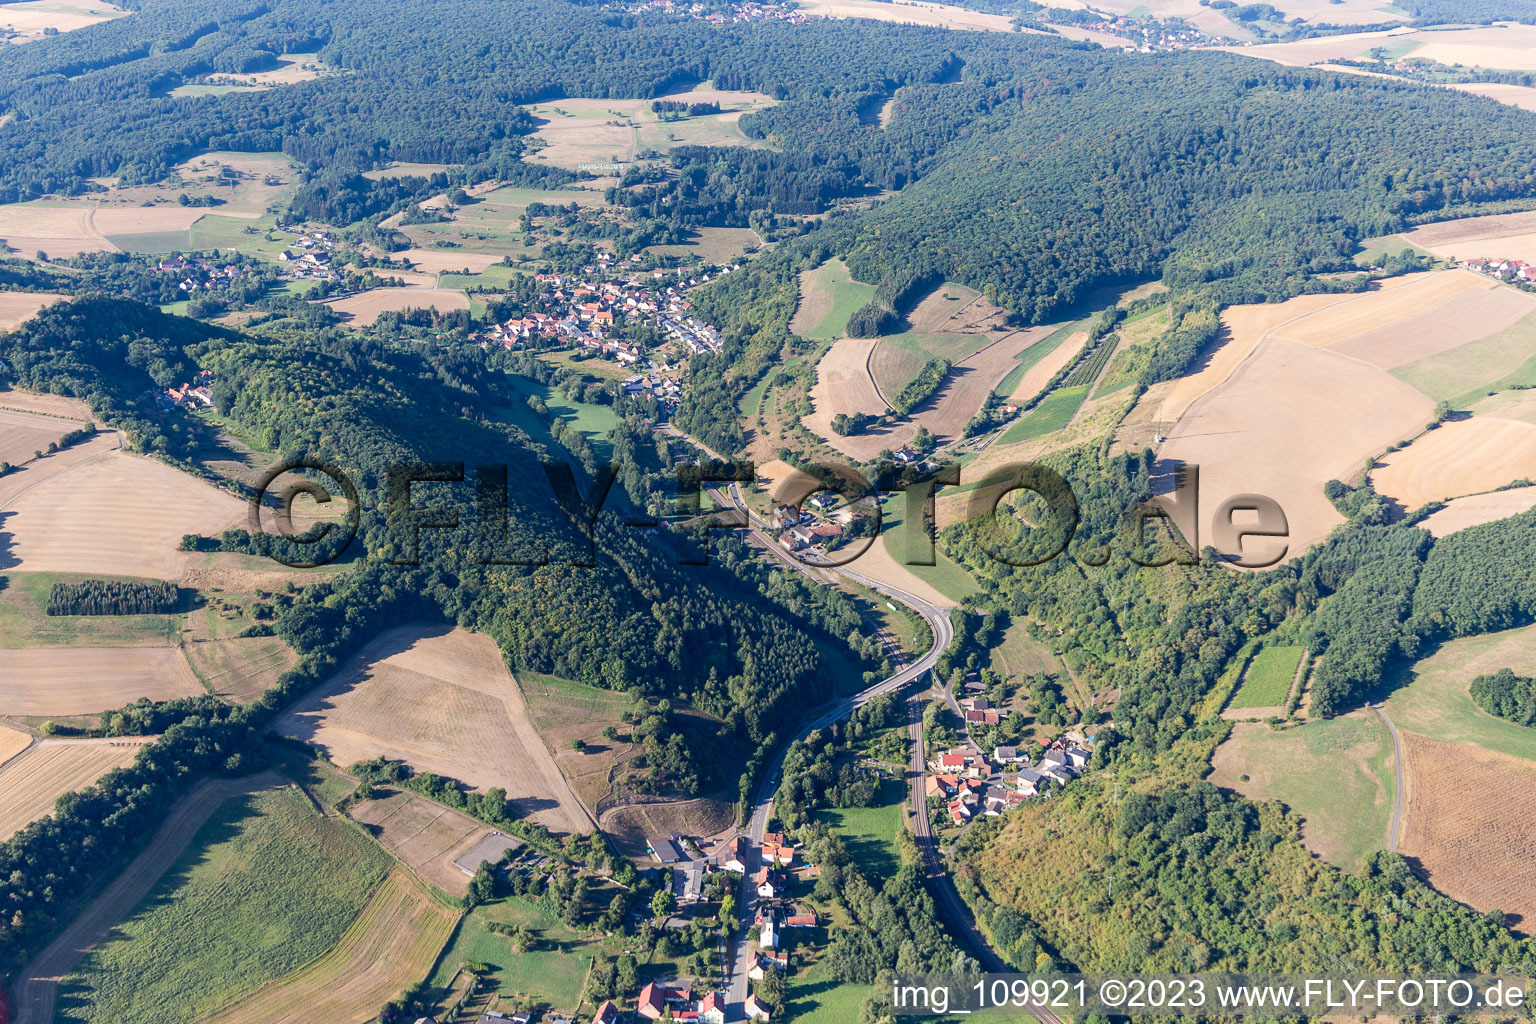 Aerial view of Mannweiler-Cölln in the state Rhineland-Palatinate, Germany